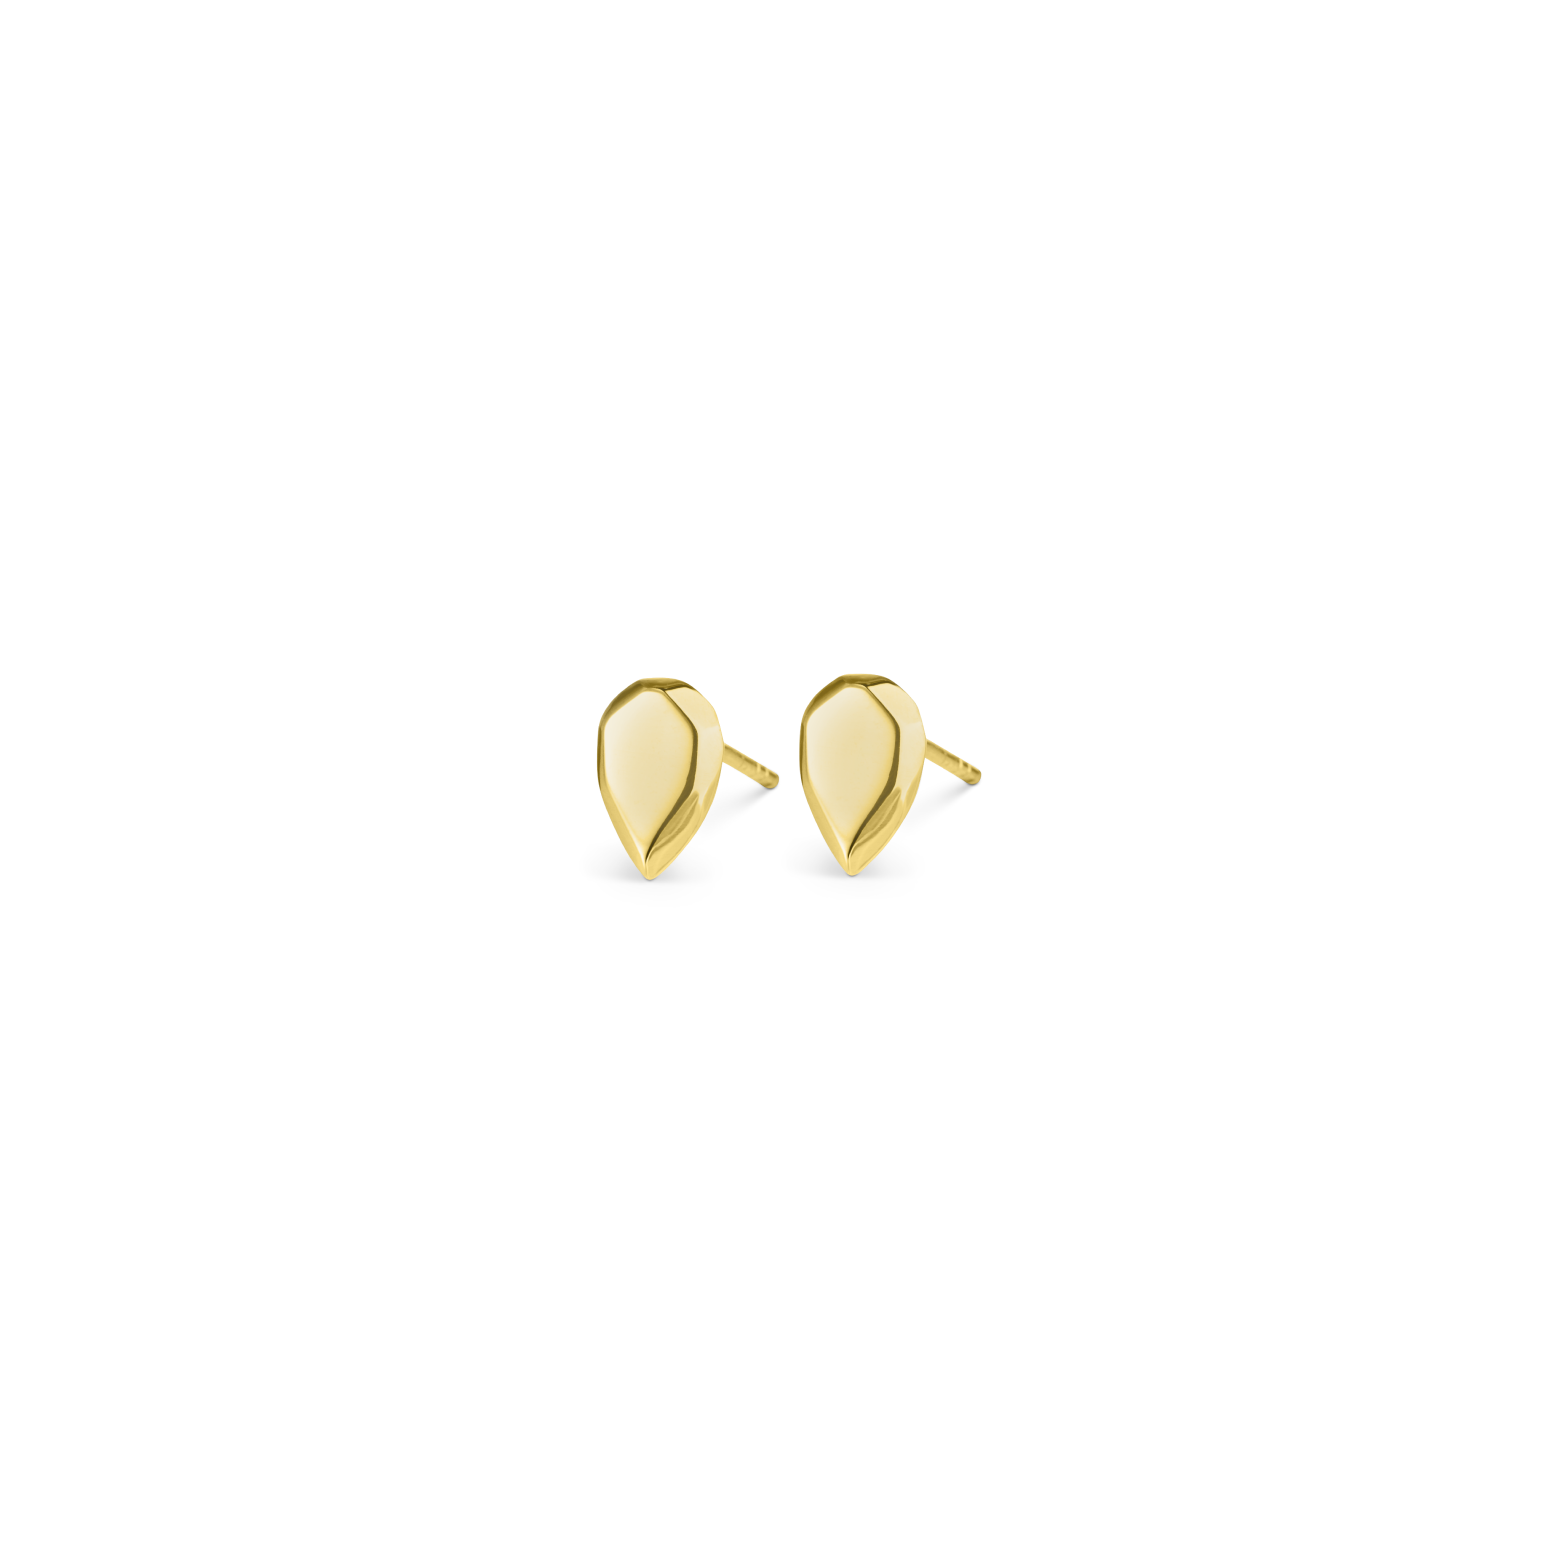 The Pear Studs